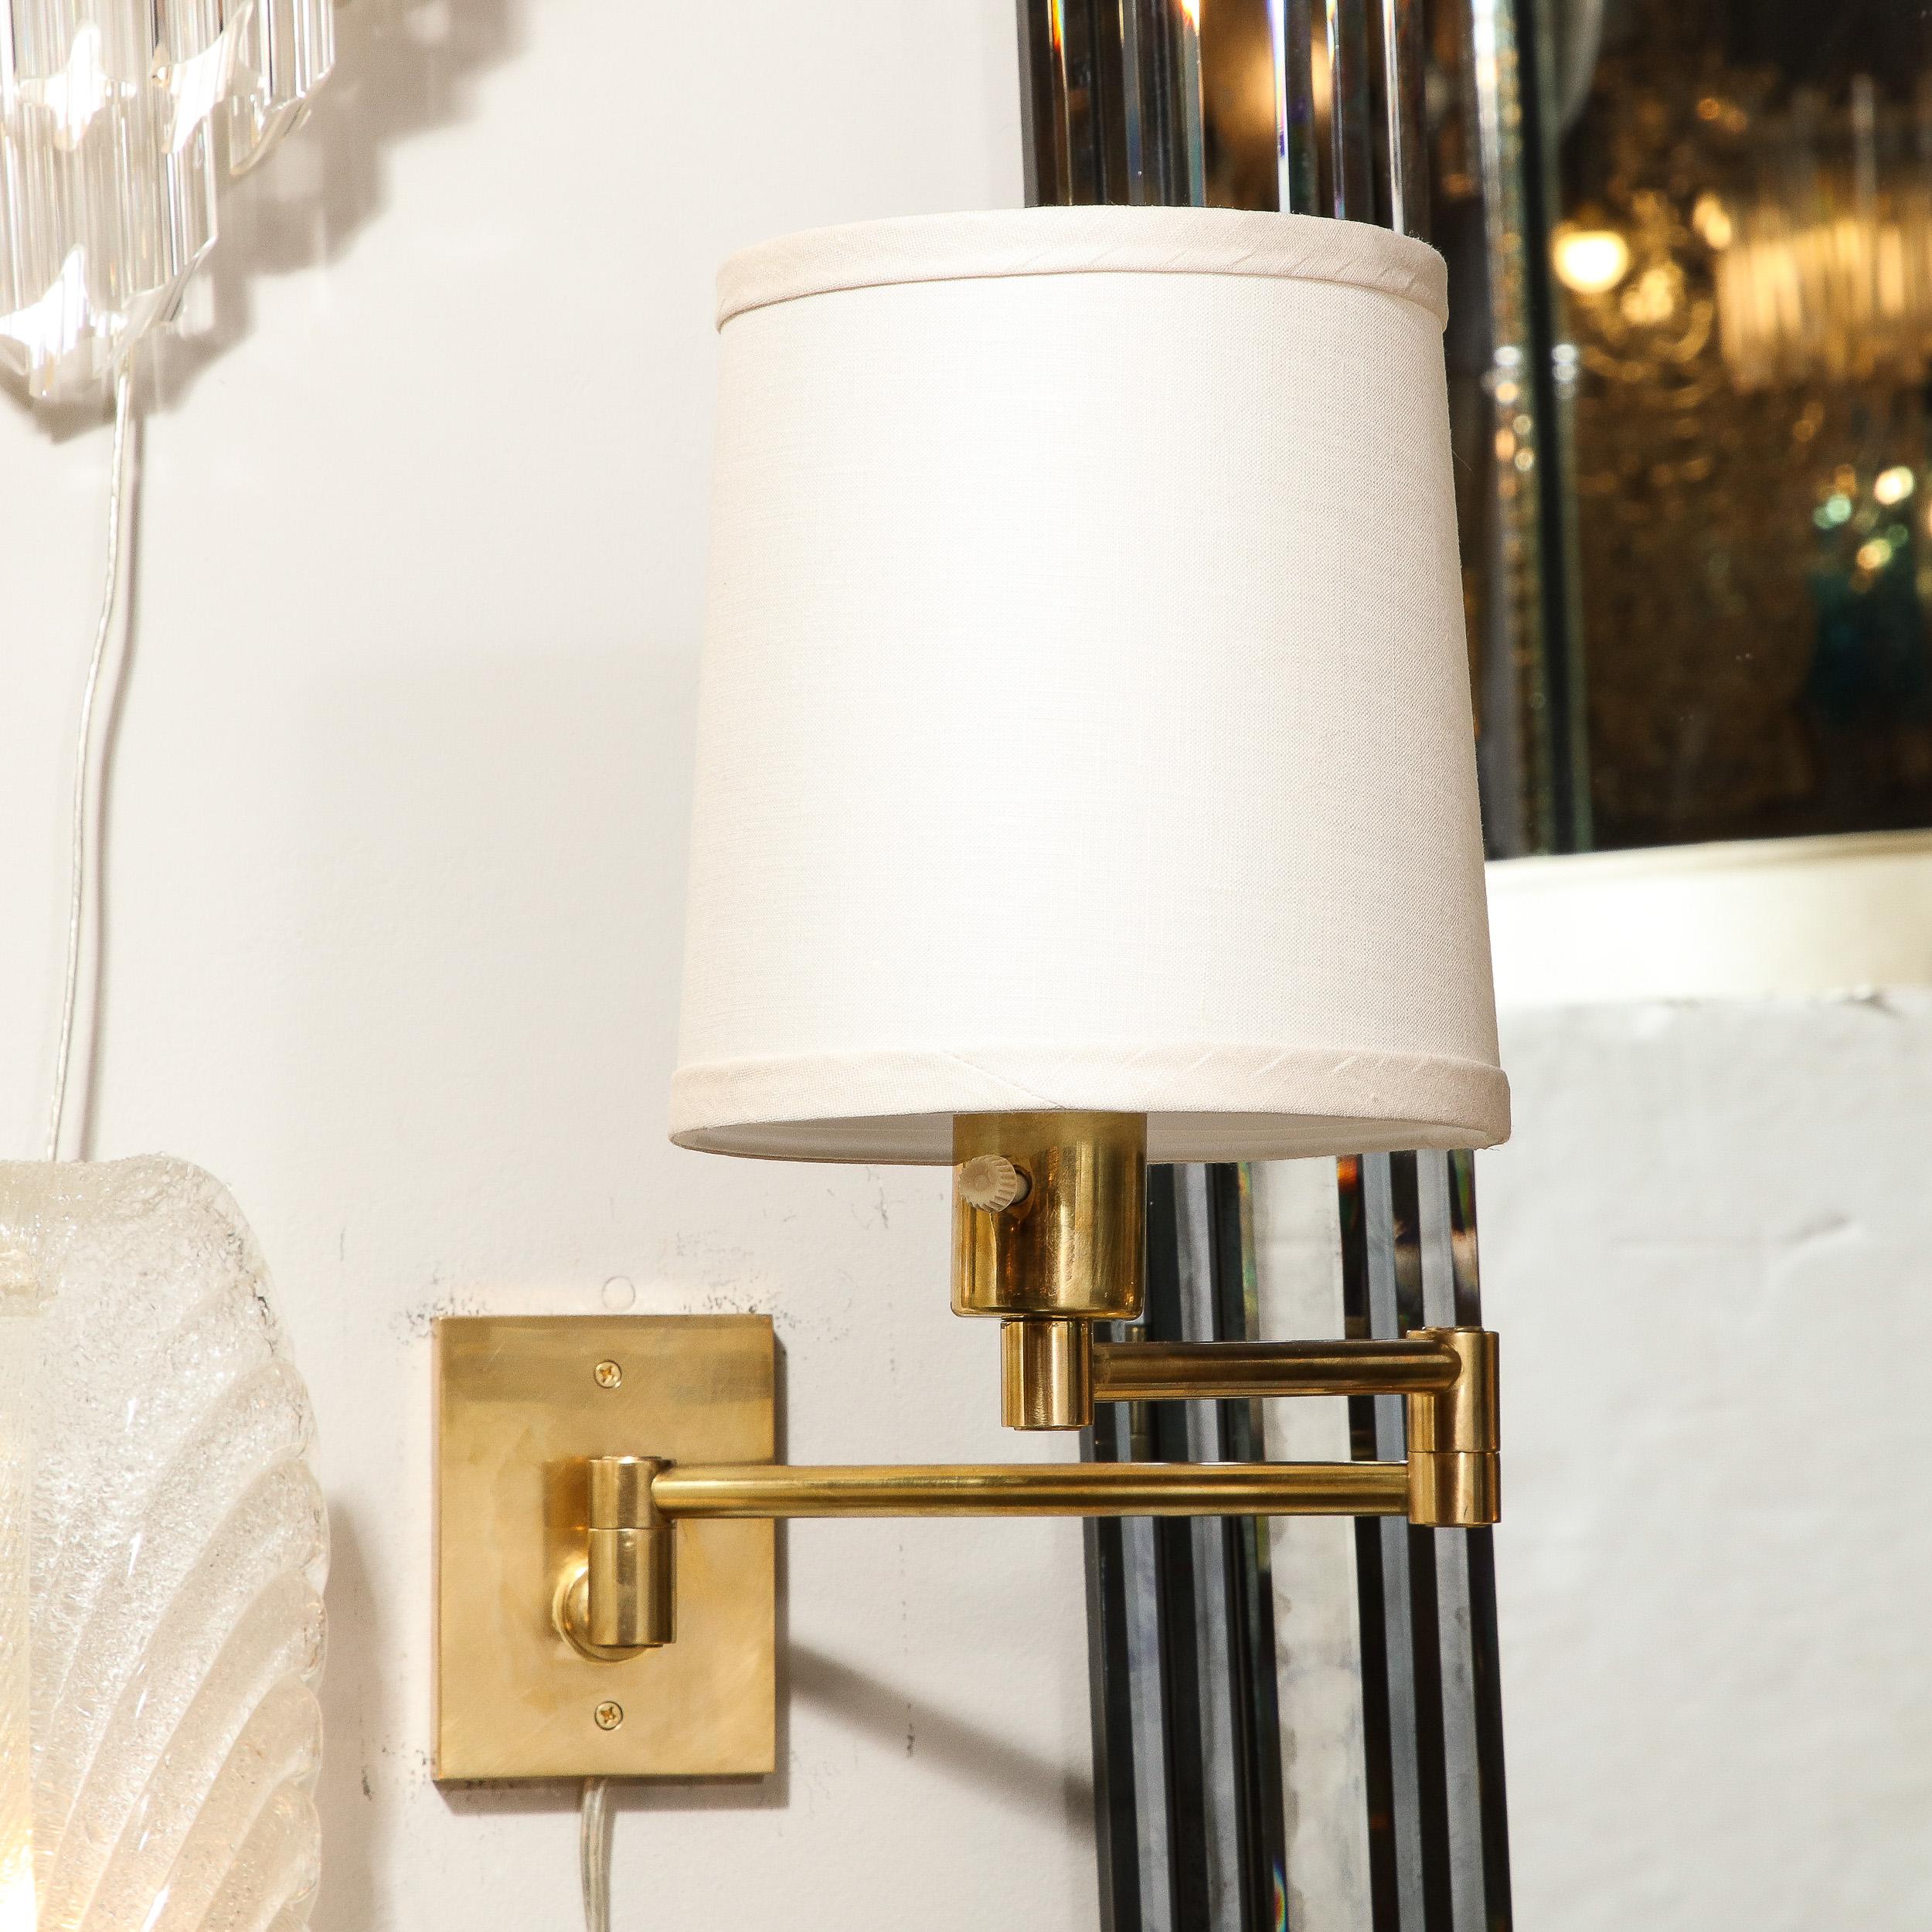 Late 20th Century Pair of Mid-Century Articulating Wall Sconces by George Hansen for Metarlarte